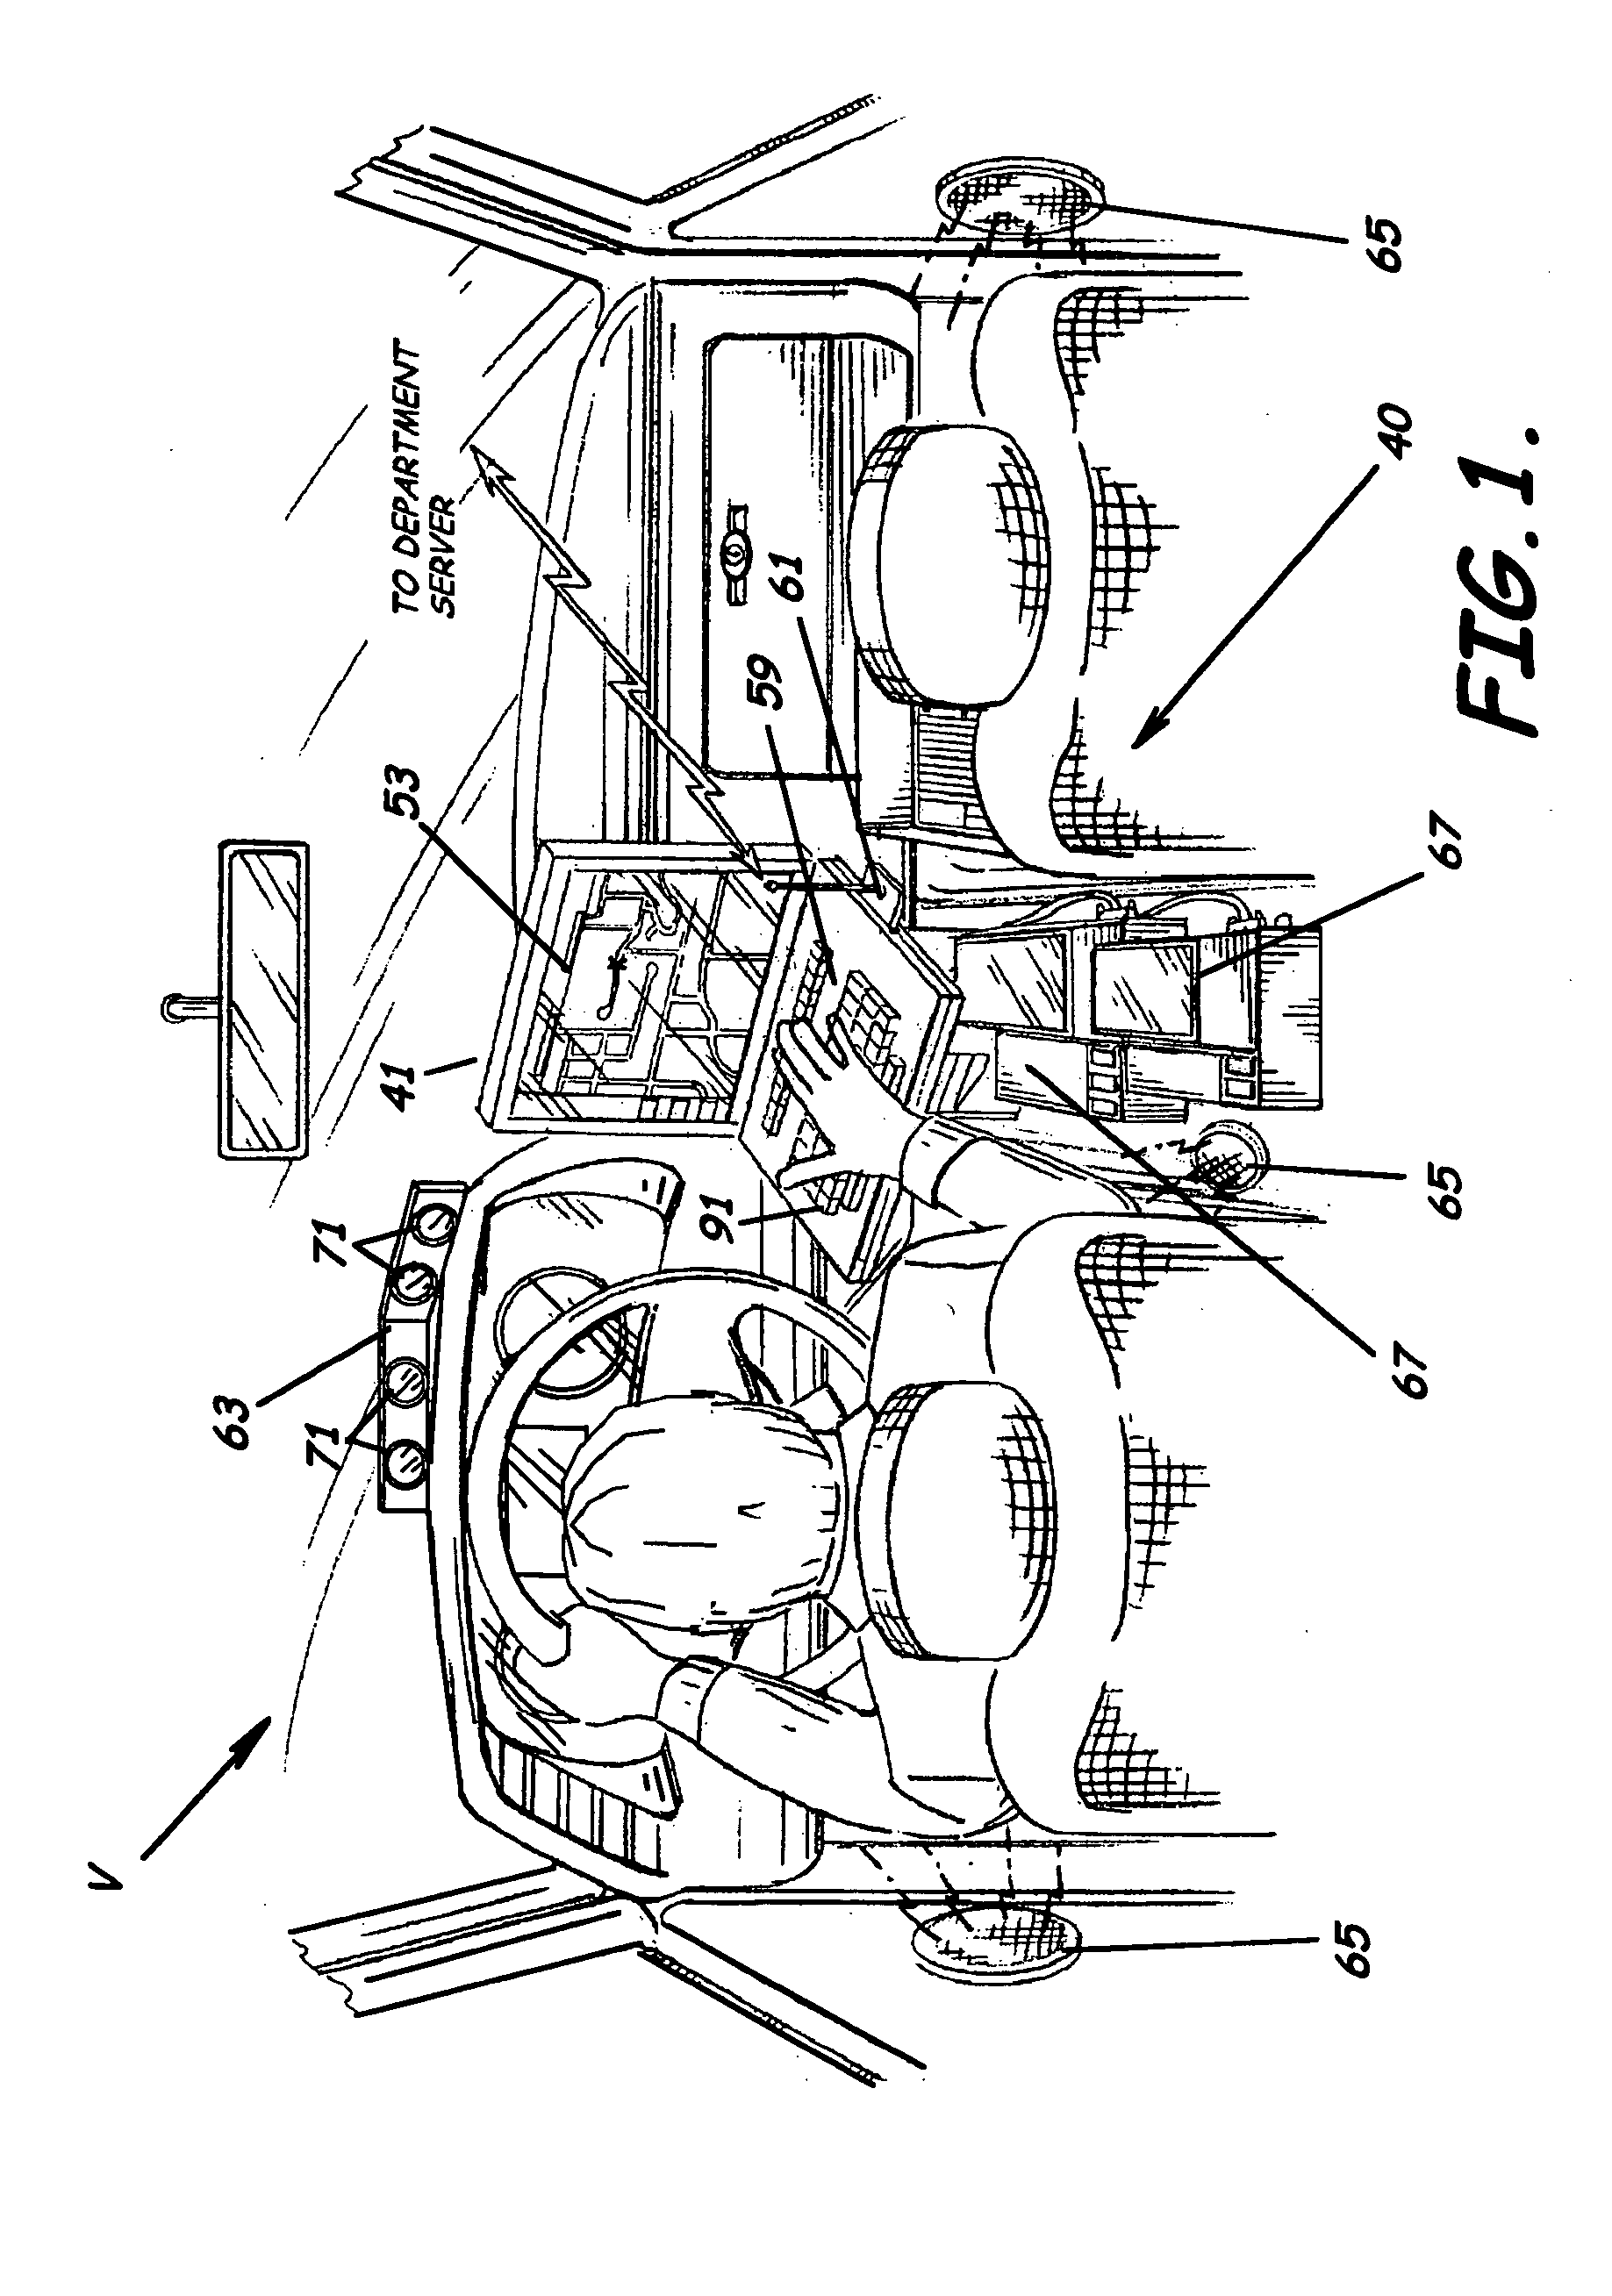 Apparatus for communicating with a vehicle during remote vehicle operations, program product, and associated methods